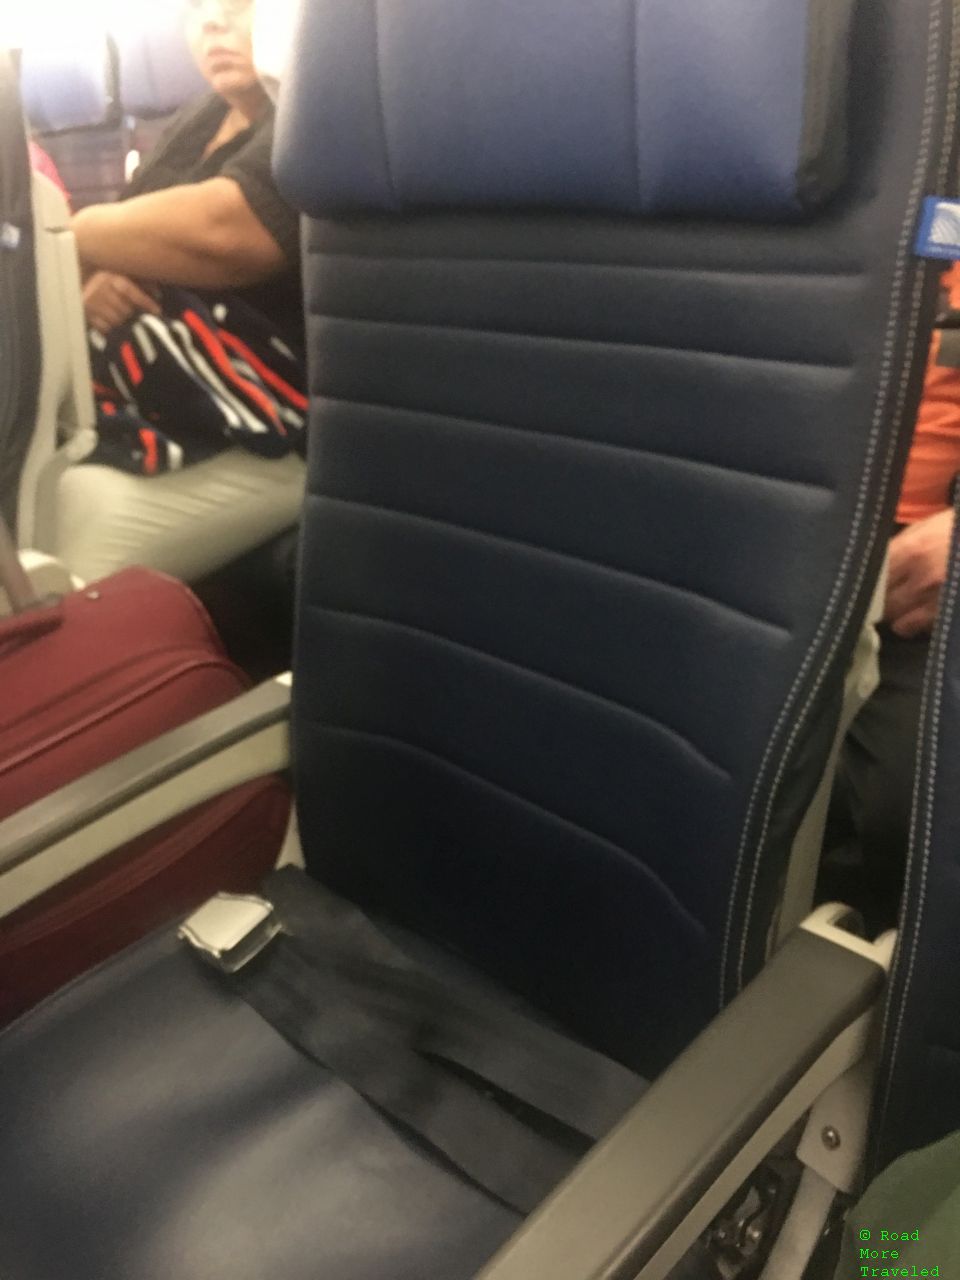 United Airlines Economy Class Review - A319 seating